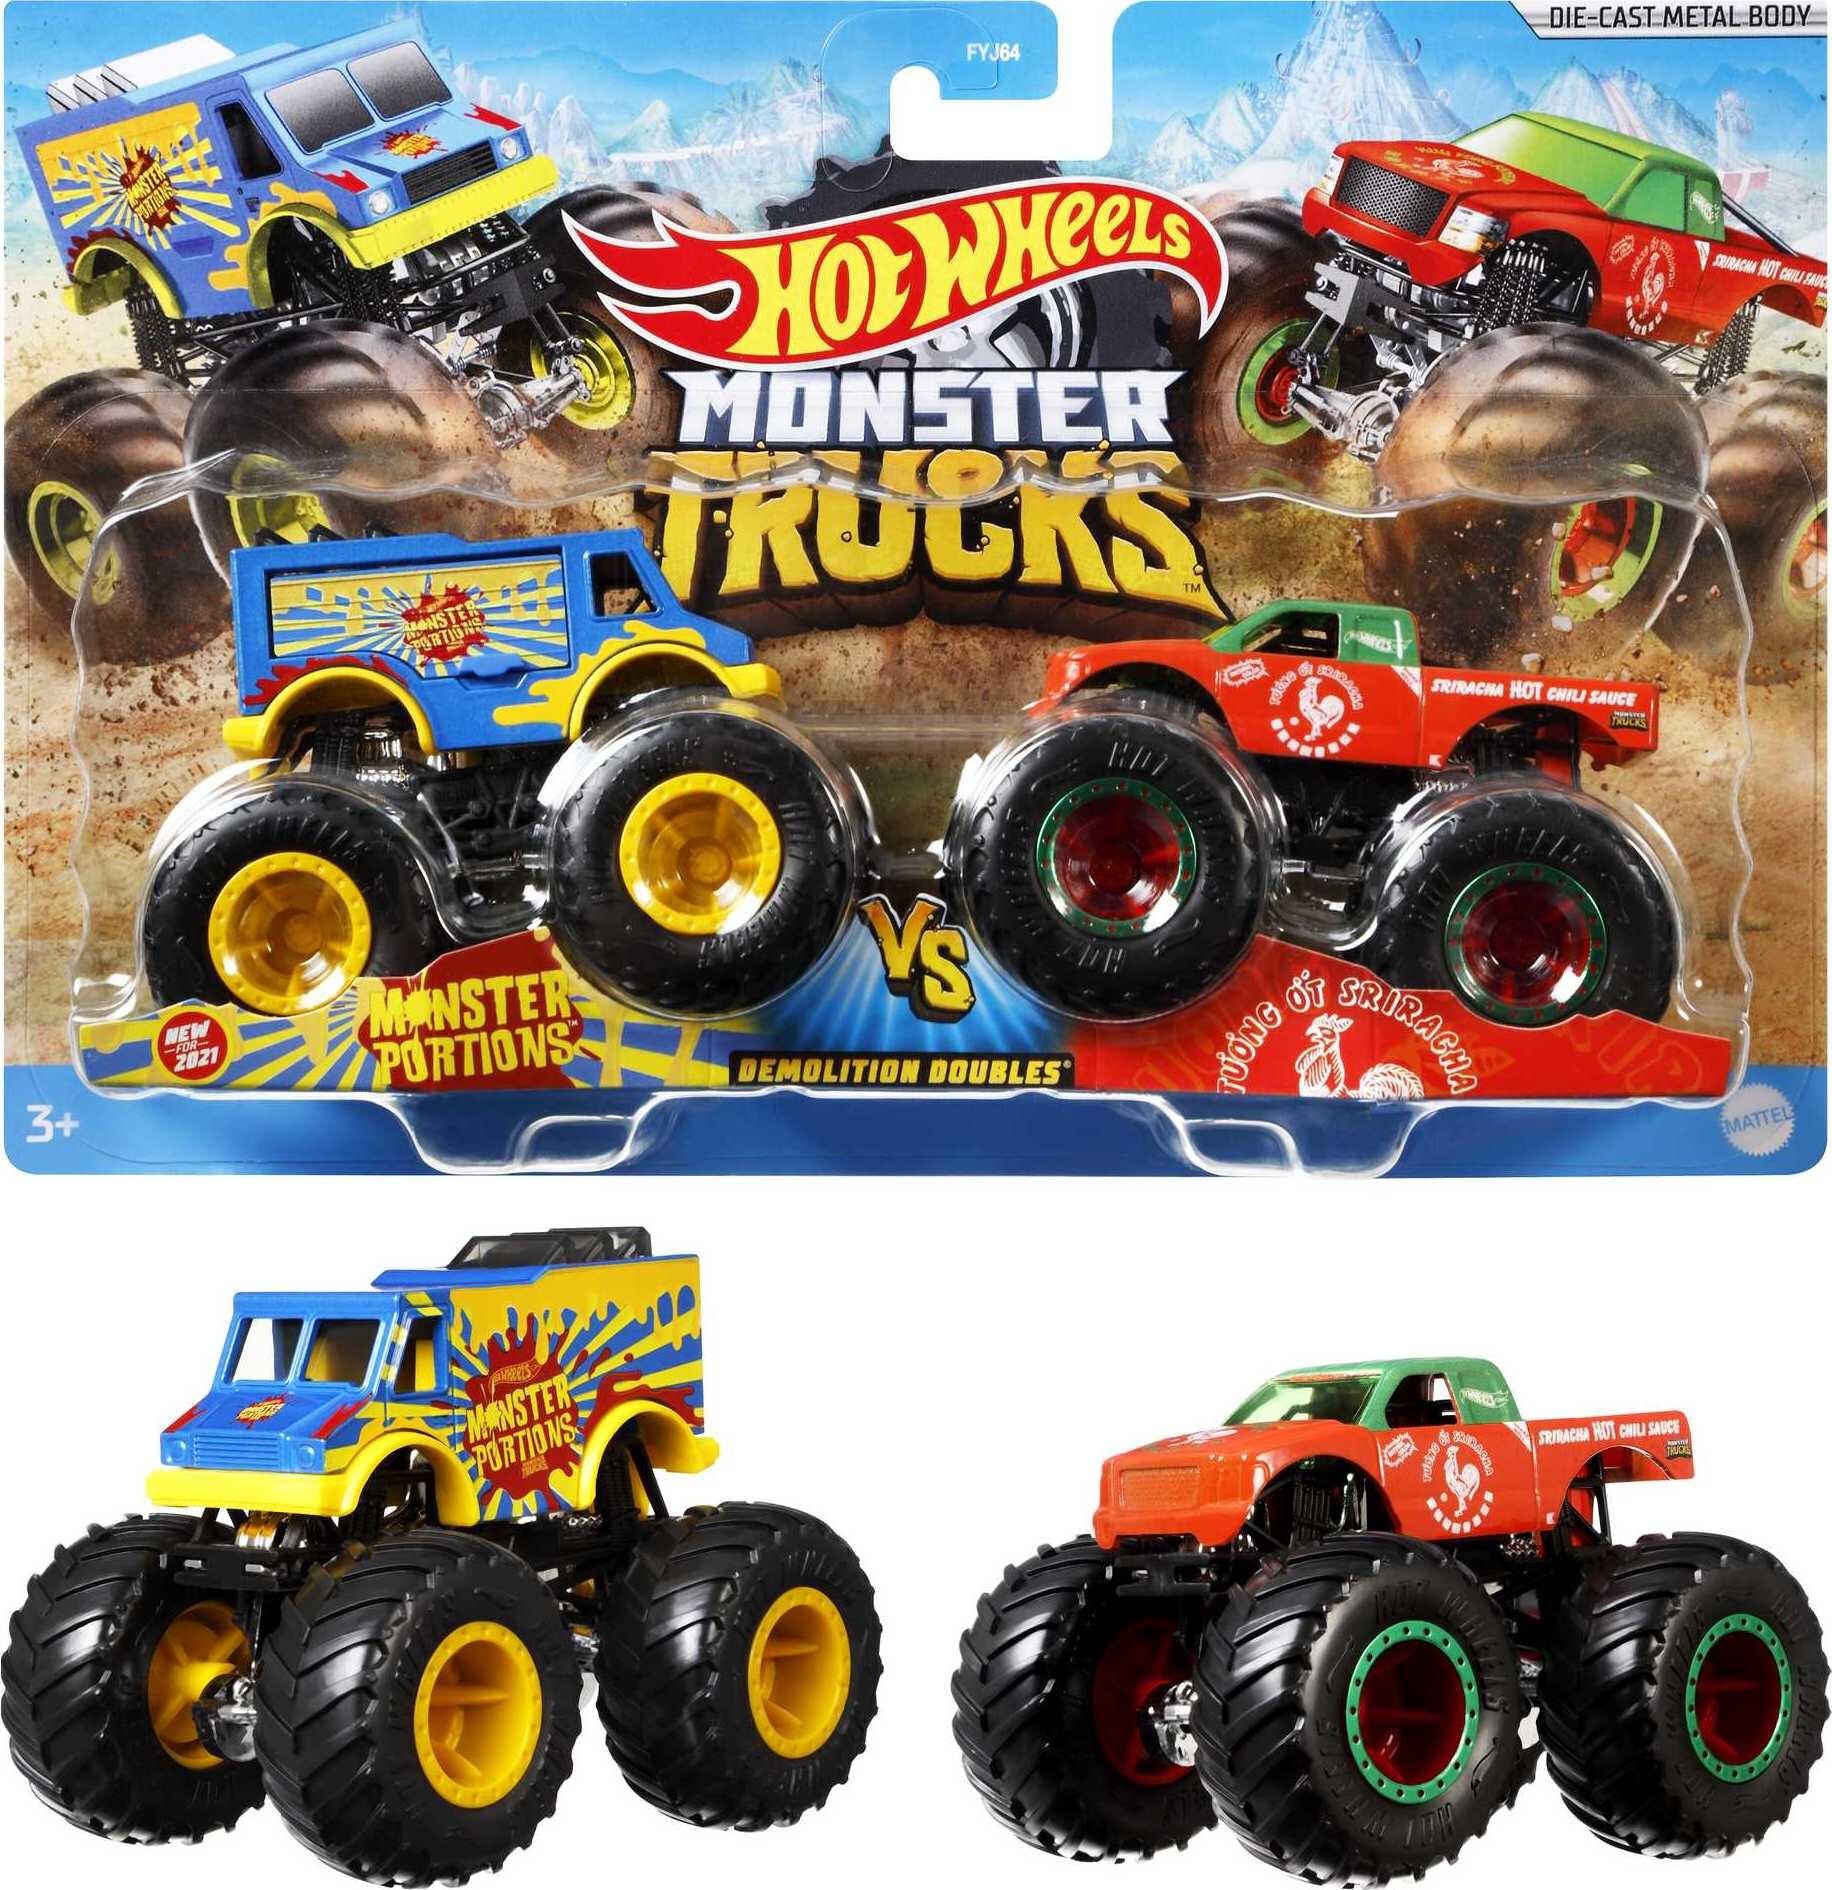 Hot Wheels Monster Trucks Demolition Doubles, Set of 2 Toy Trucks (Styles May Vary) - image 1 of 6